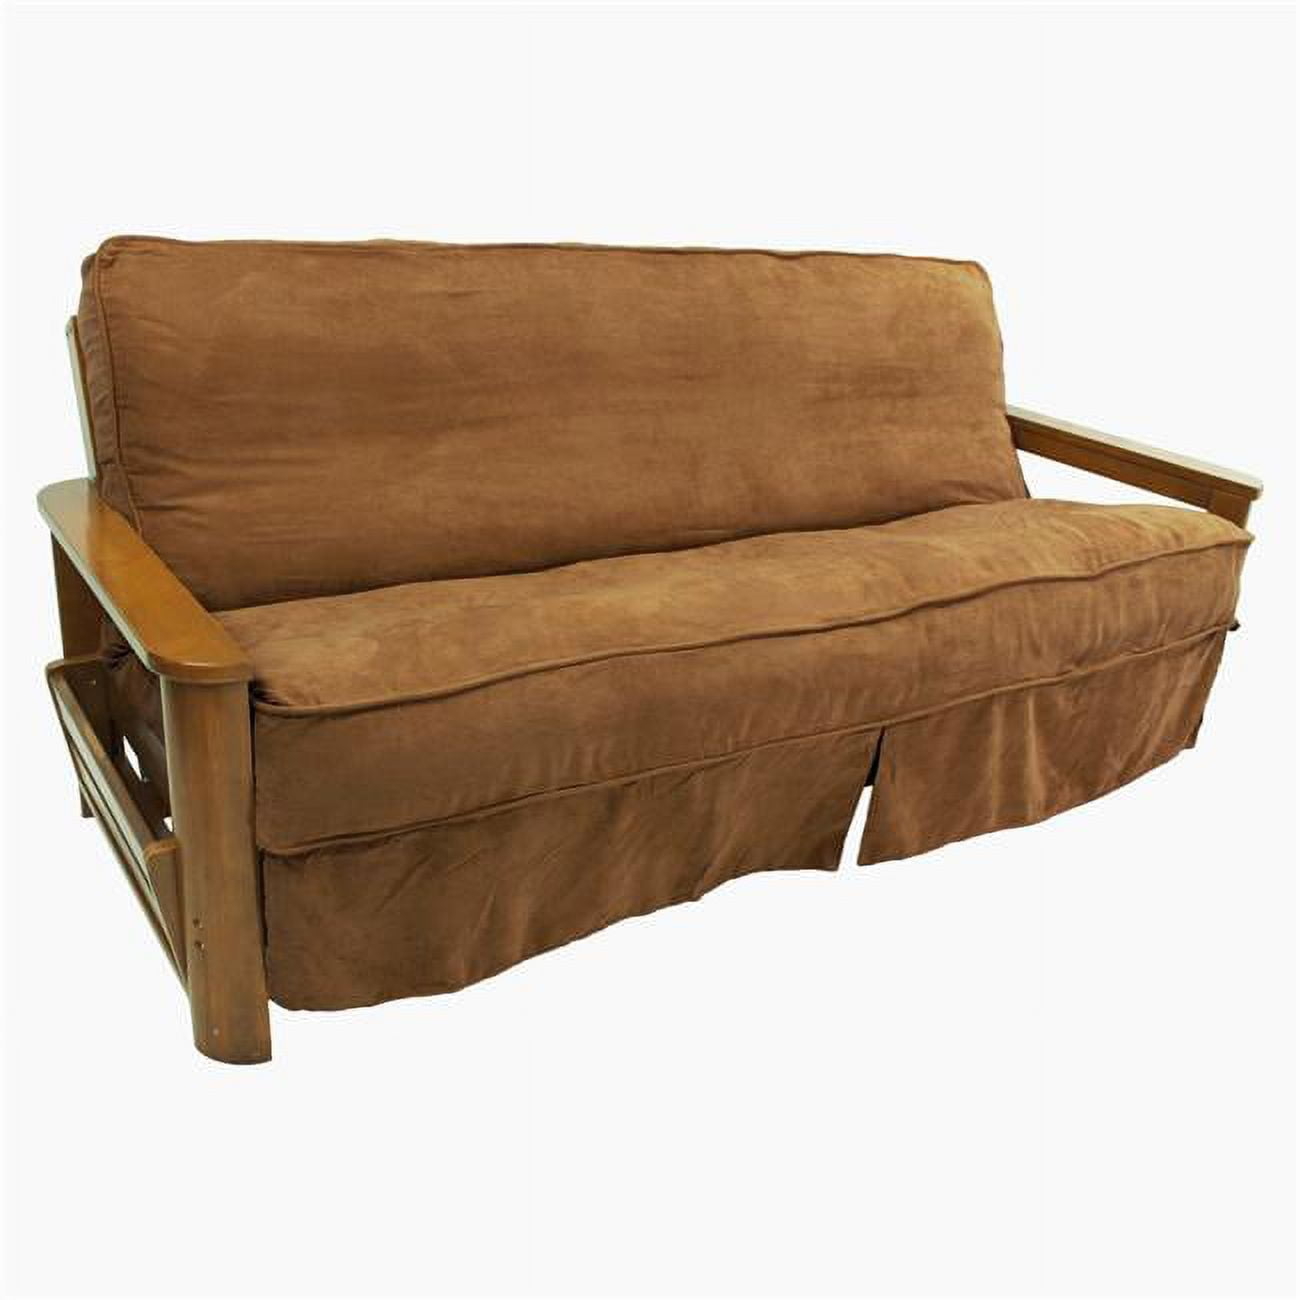 Picture of Blazing Needles 9670-CD-MS-SB 8 to 9 in. Solid Microsuede Double Corded Full Futon Slipcover, Saddle Brown